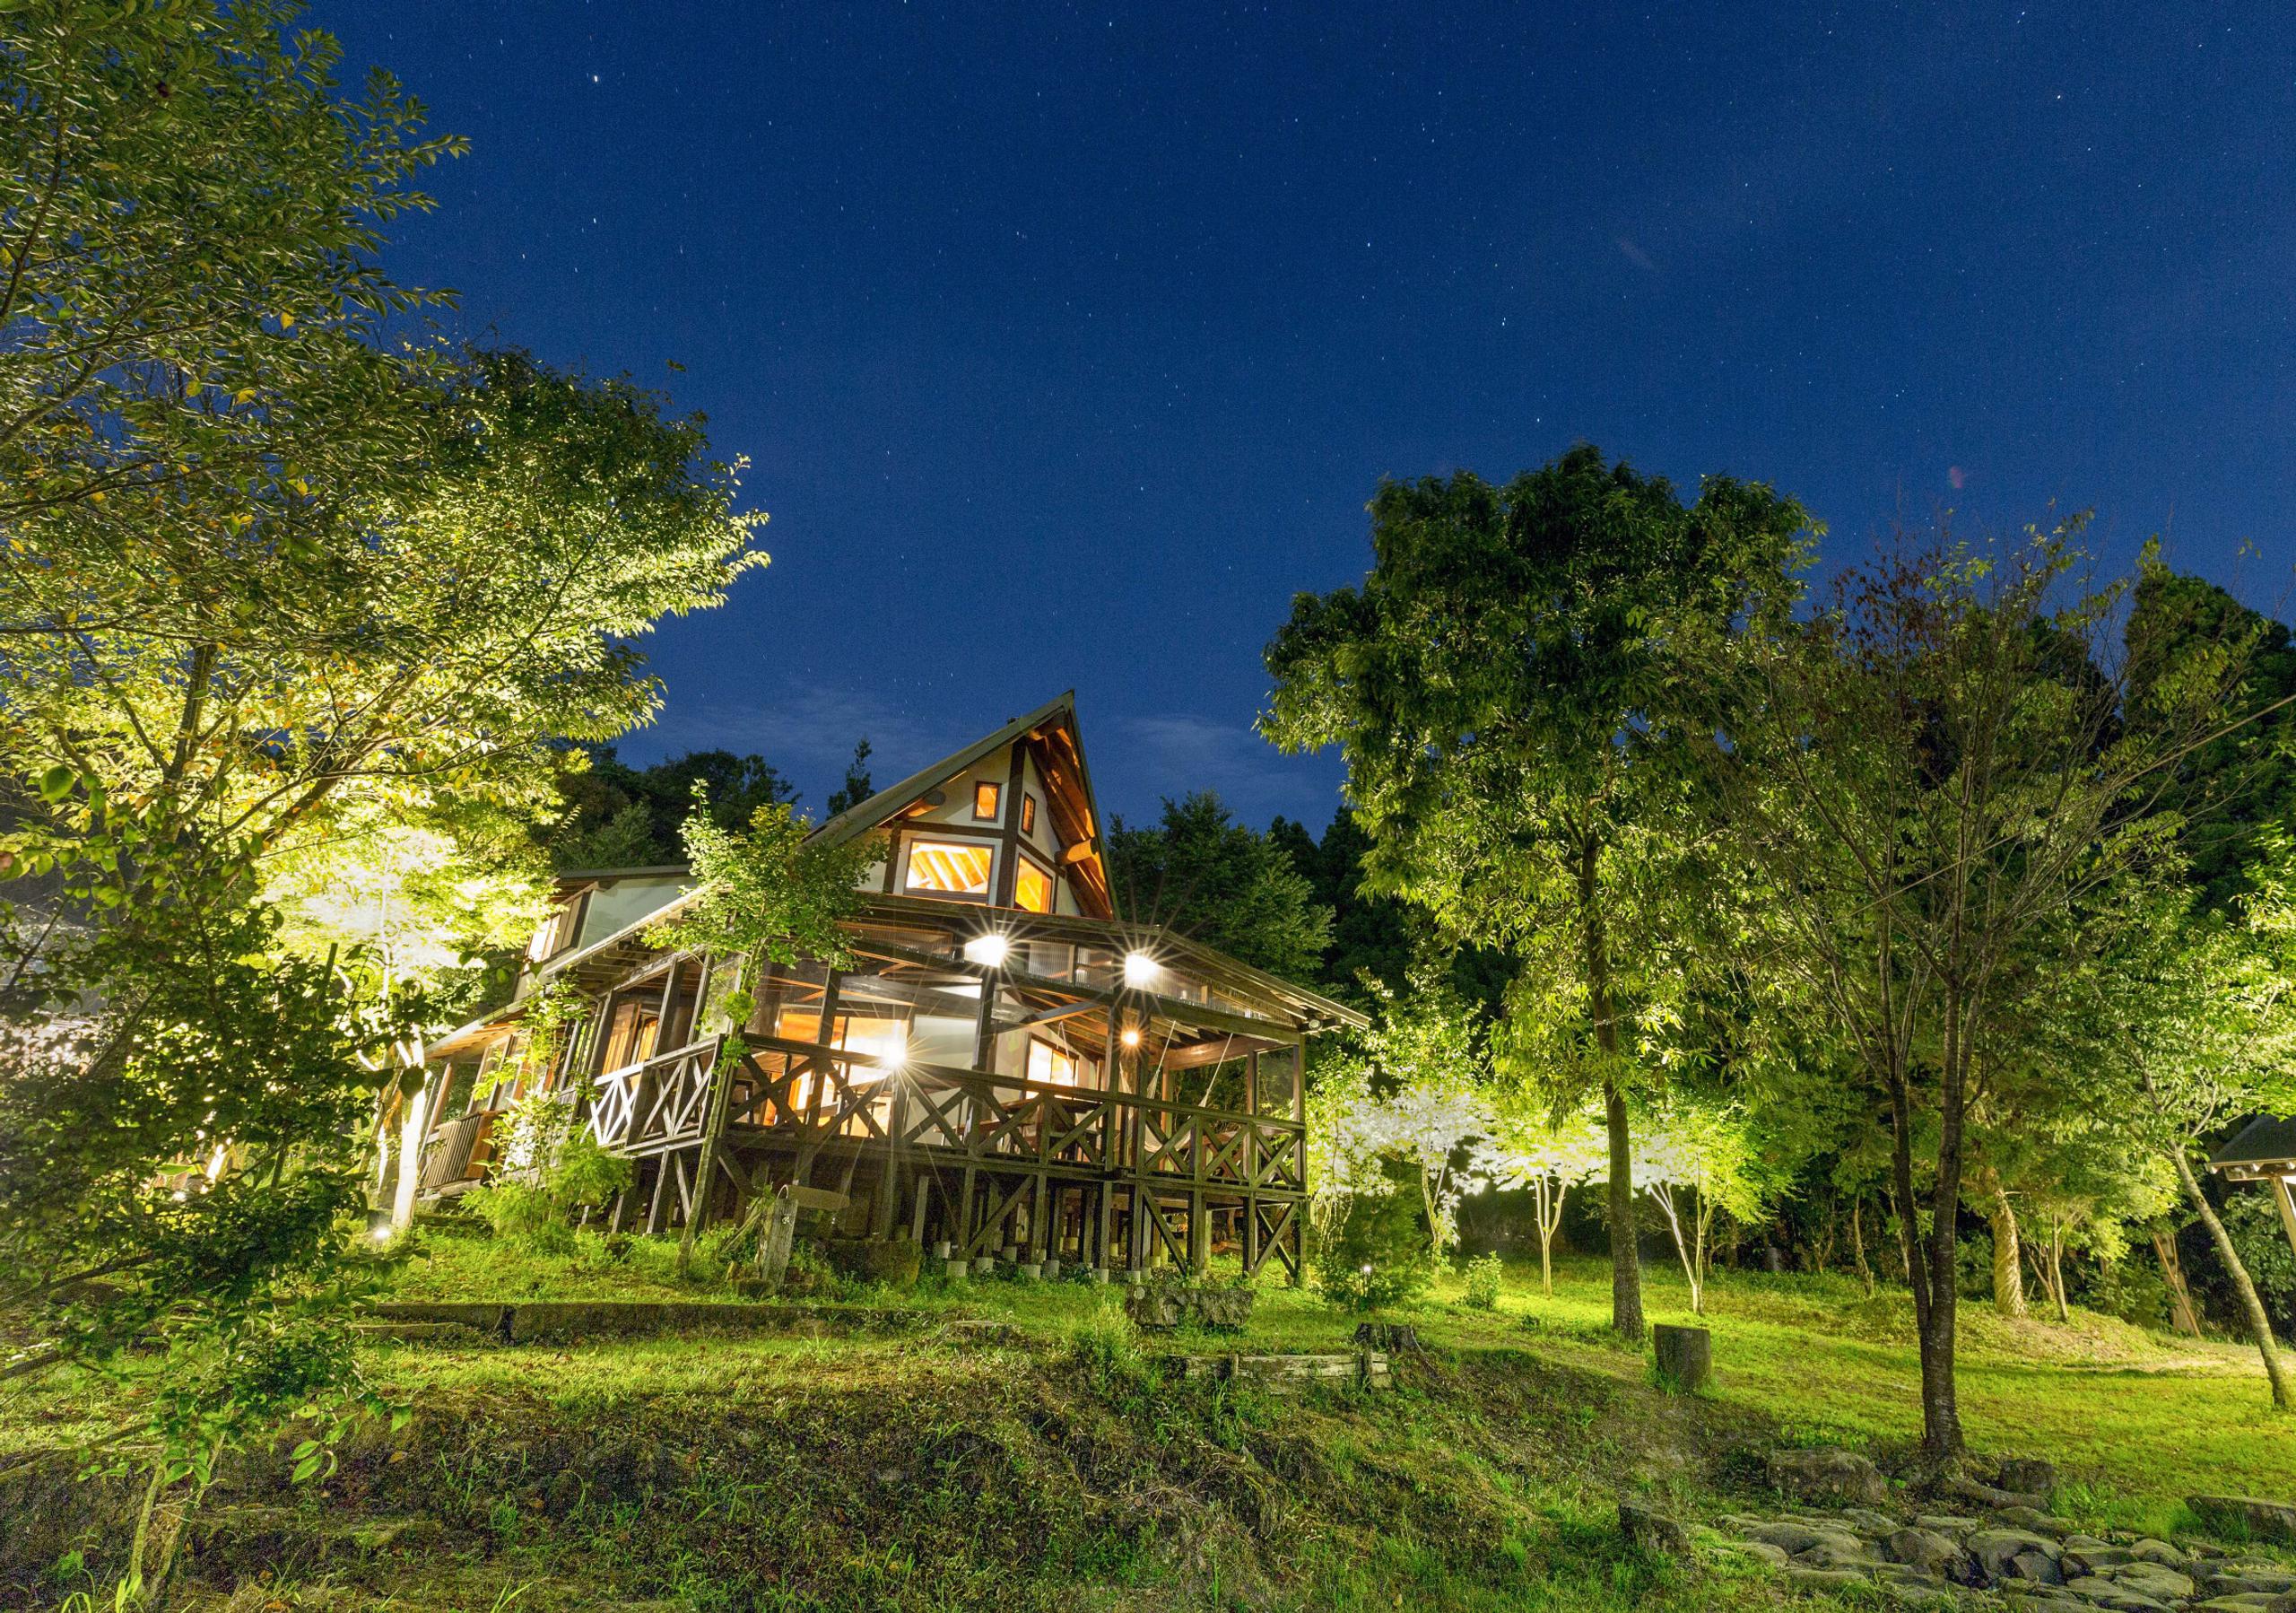 Night view of Yama Mountain house with forest lit up